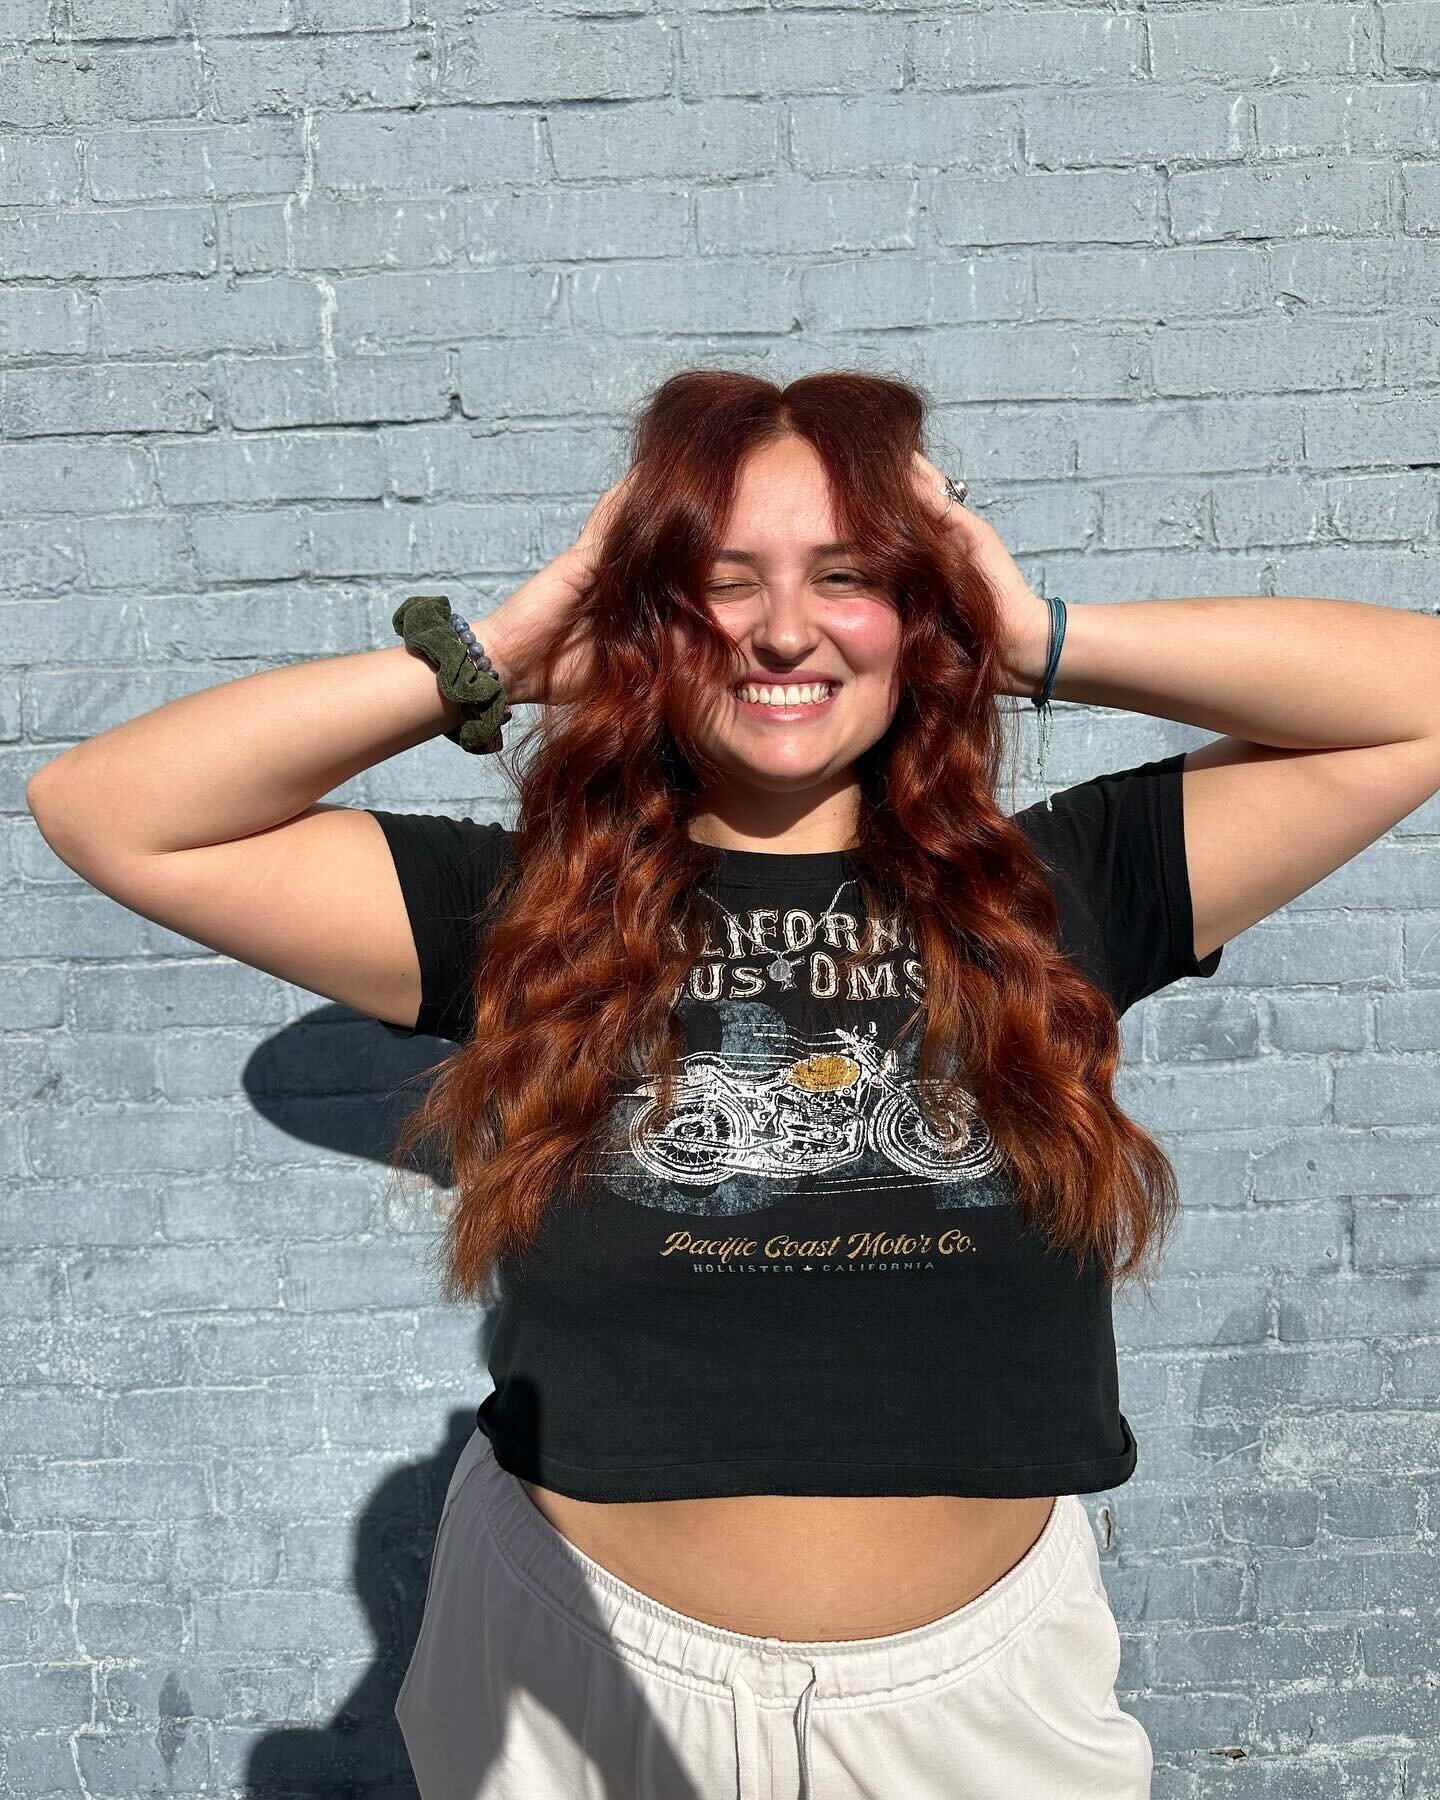 In my personal opinion, @clairehart.02 should&rsquo;ve been born a redhead. 🥊

I dare you to find someone cuter. 

#redhead #redhair #wellahair #kentuckyhairs #hairthelex #sharethelex #universityofkentucky